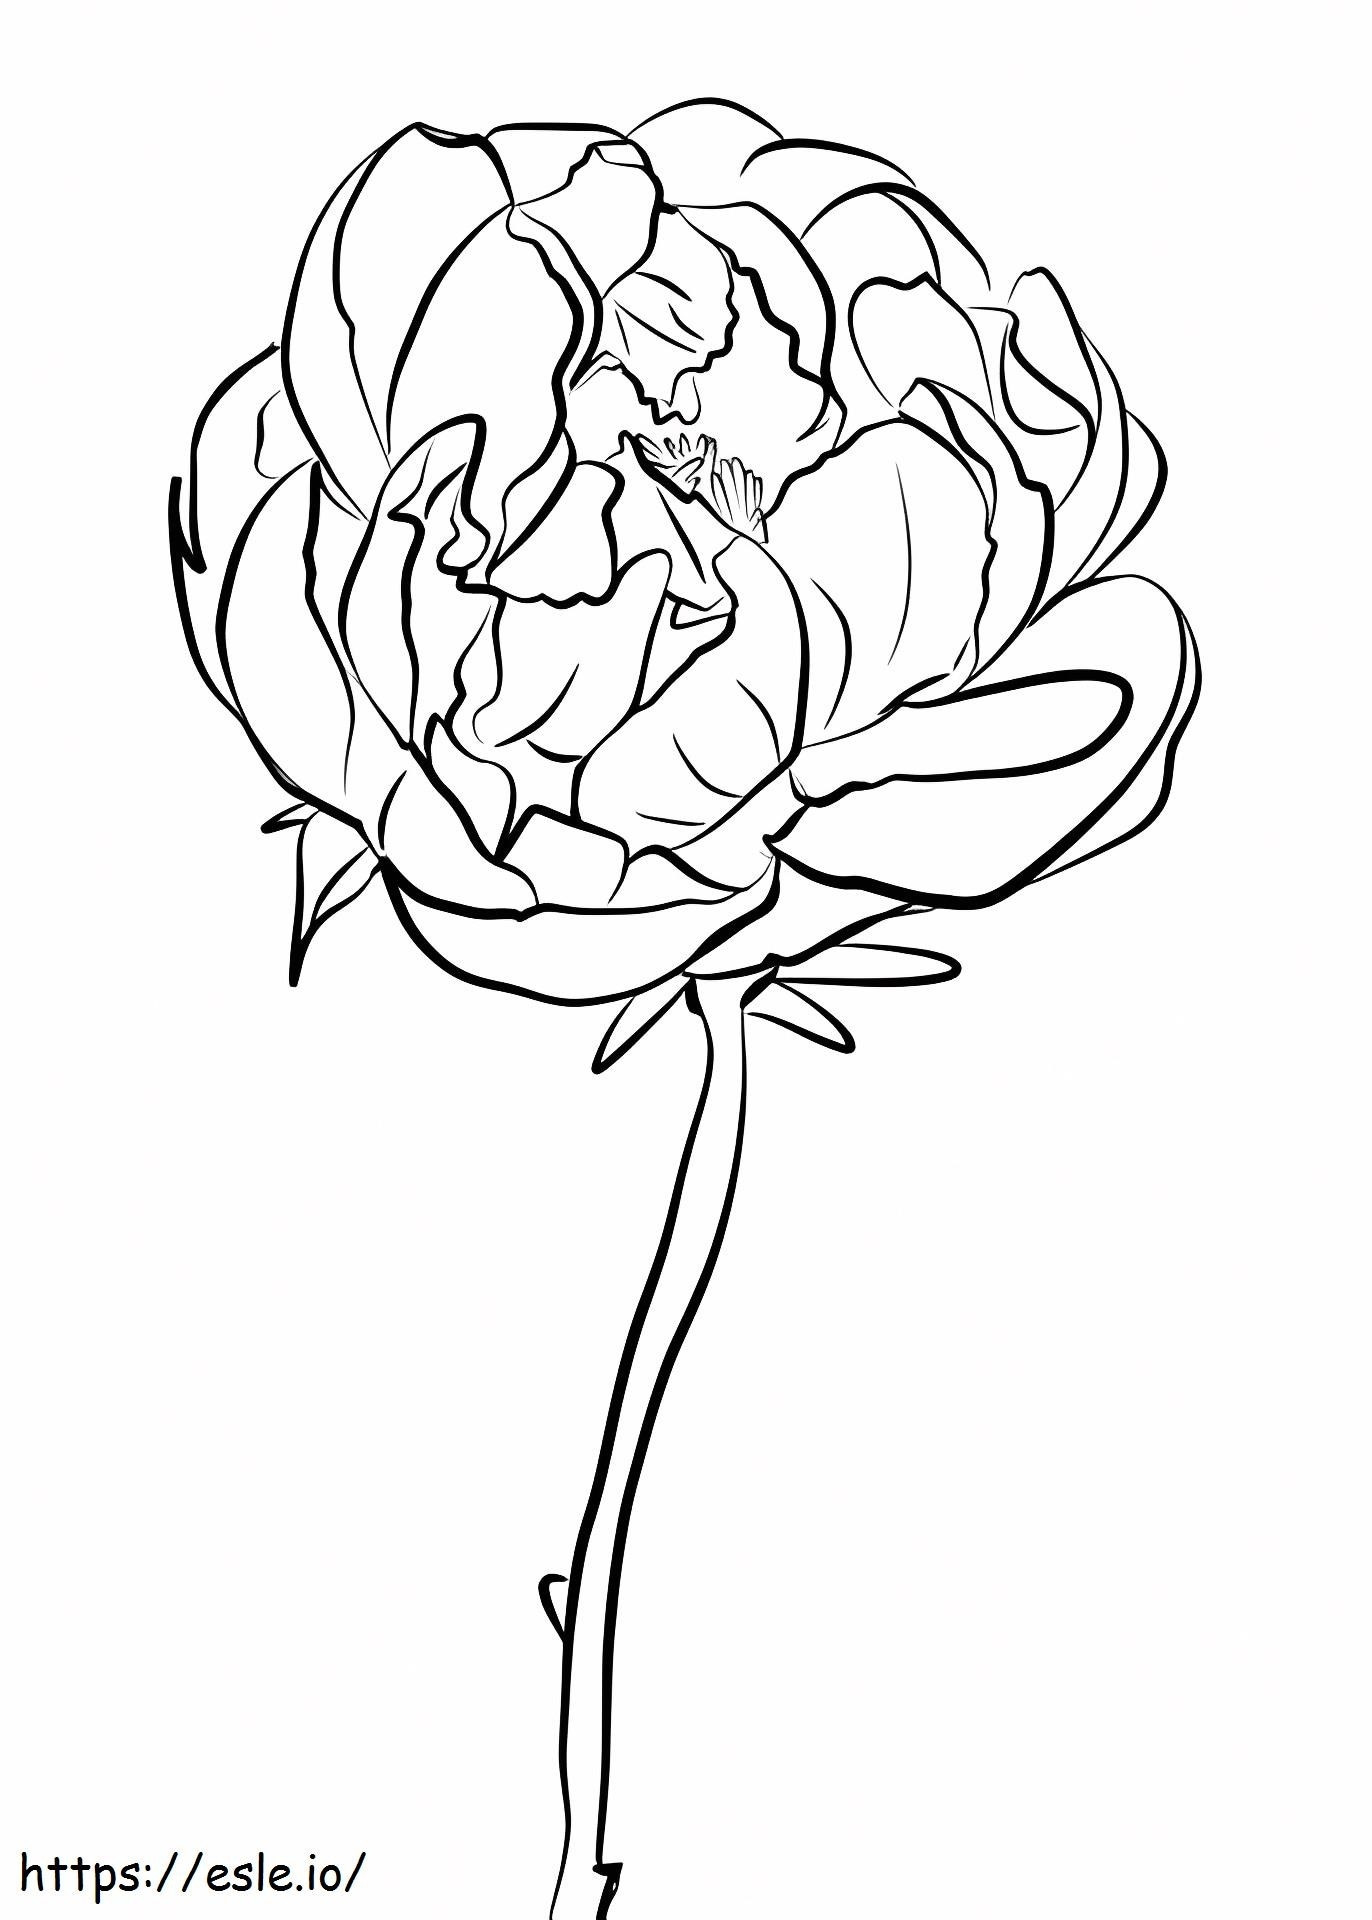 1527064086_Peony_1 coloring page